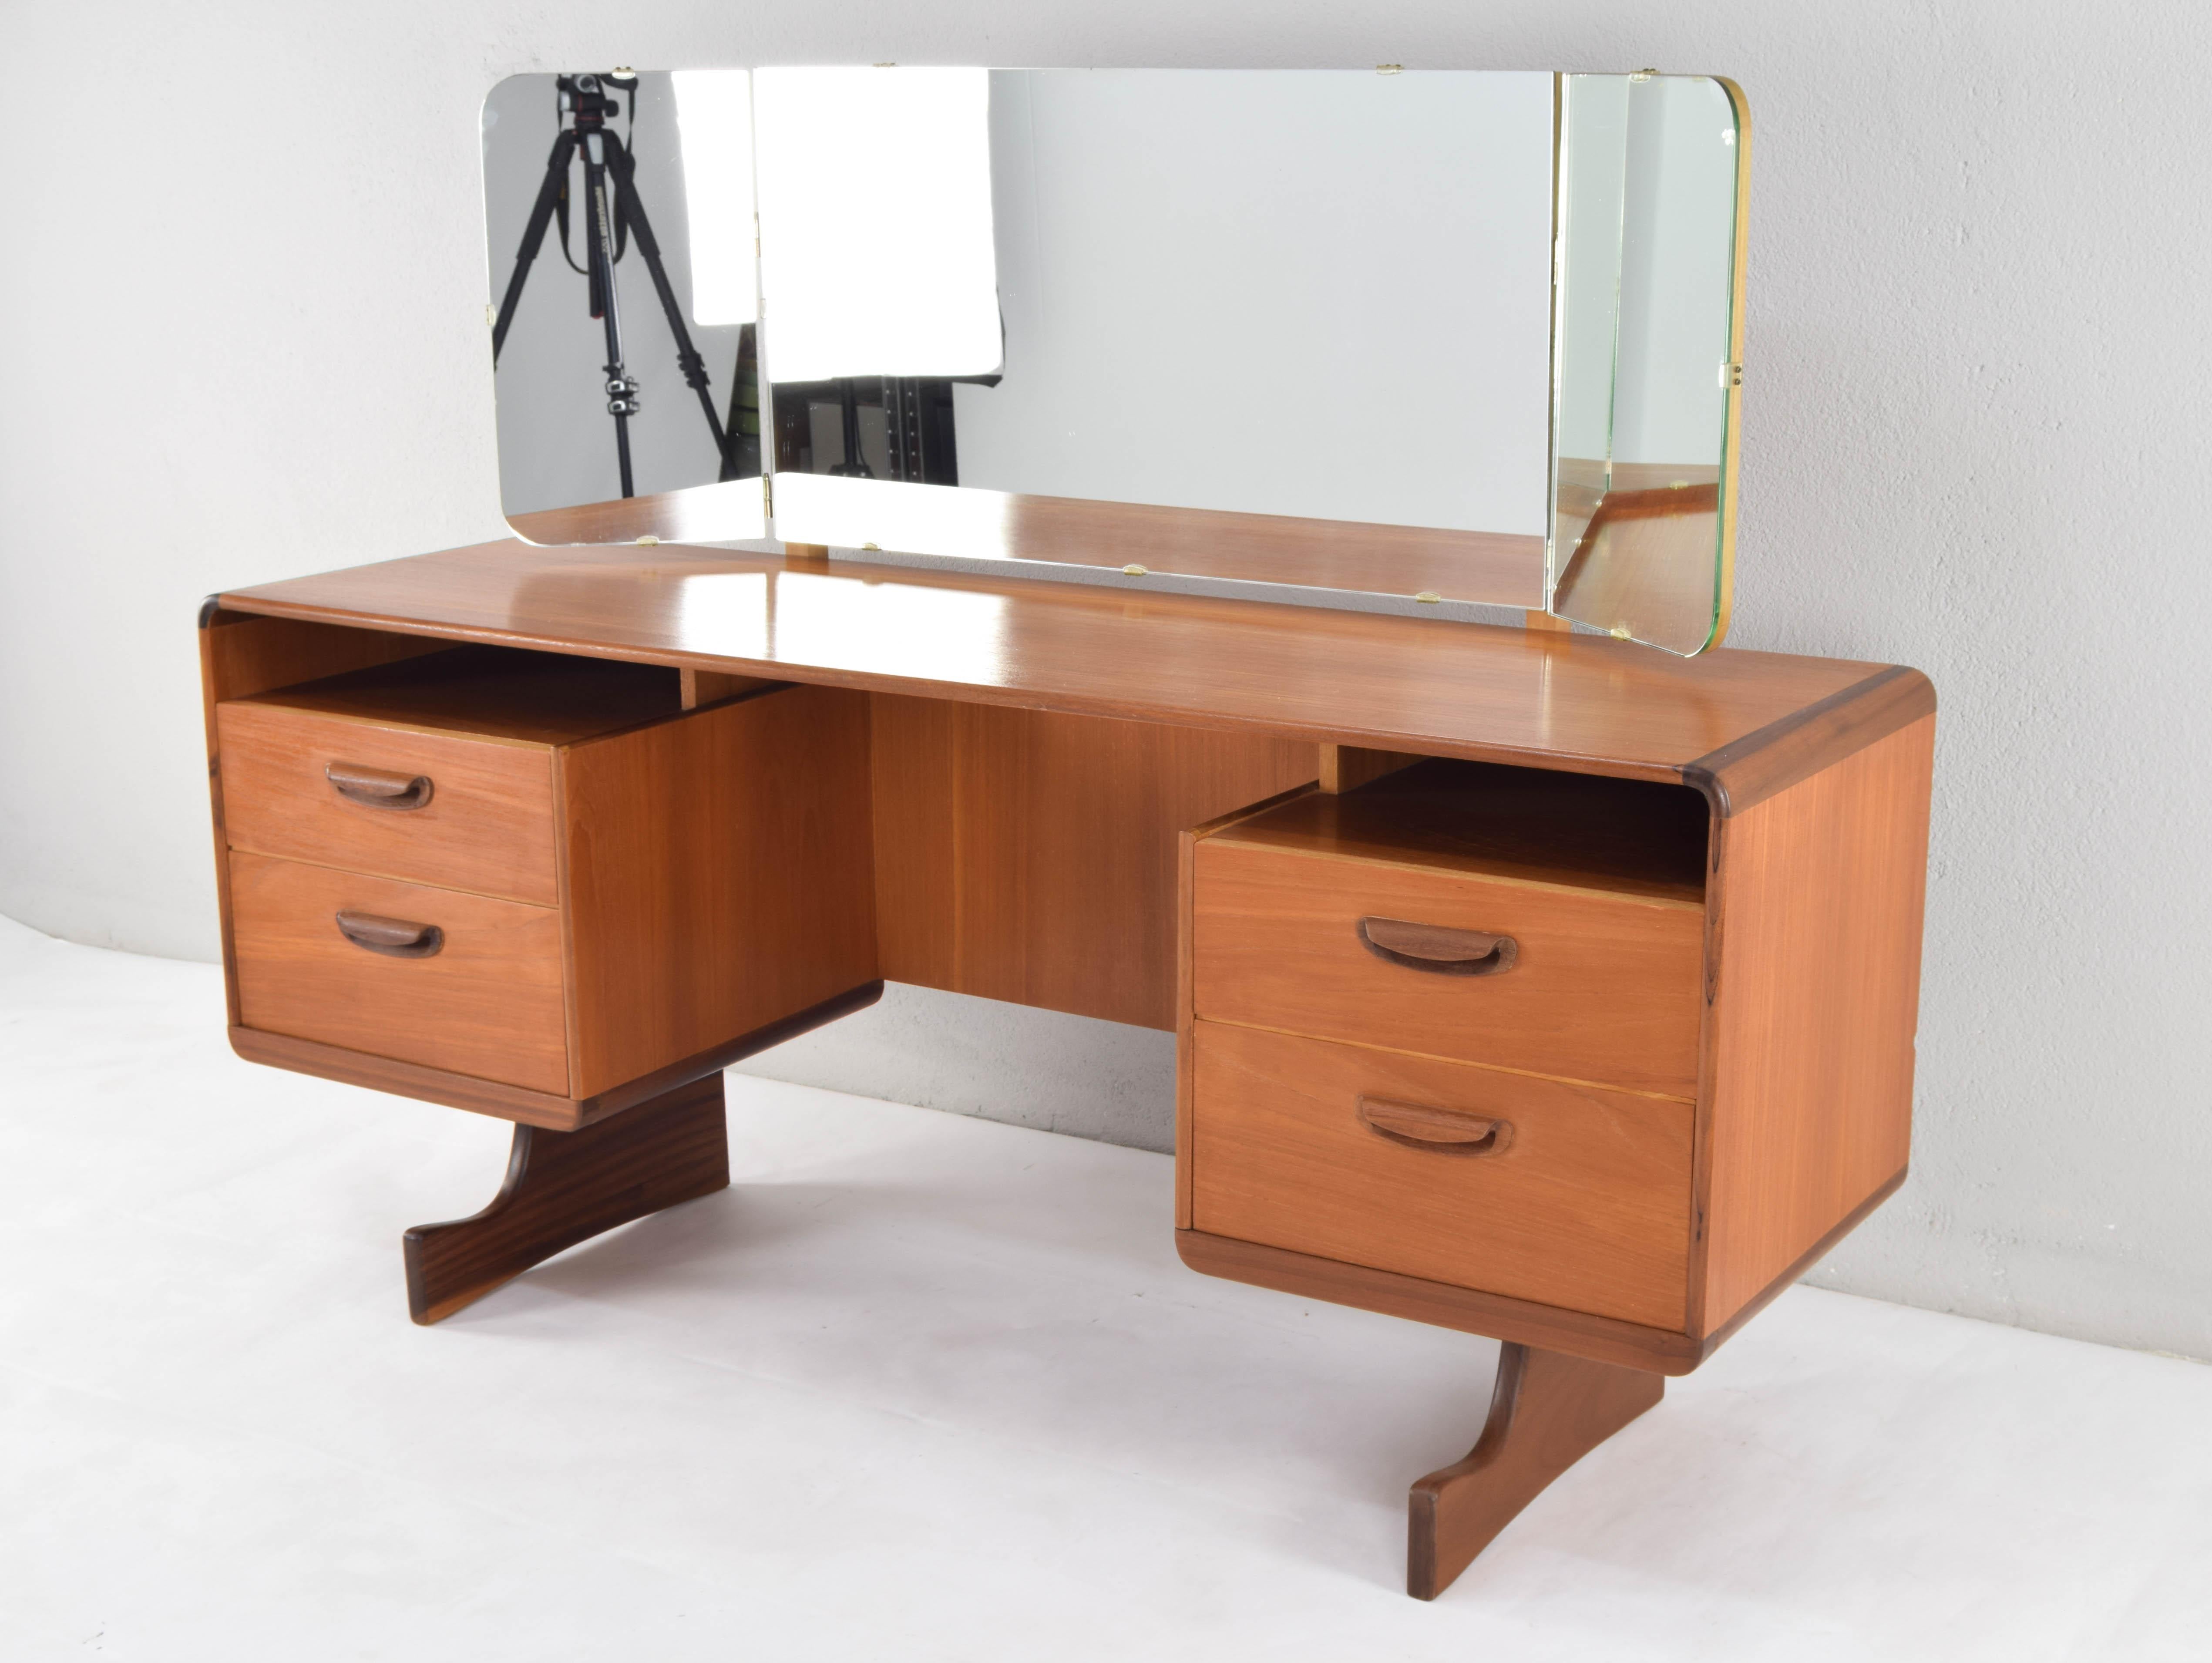 Teak wood dressing table with triptych mirror. Spectacular piece with fluid organic lines, with curved angles and sculpted handles, manufactured by the Scottish cabinetmaker Beithcraft.

This piece, in addition to being one of the best and most